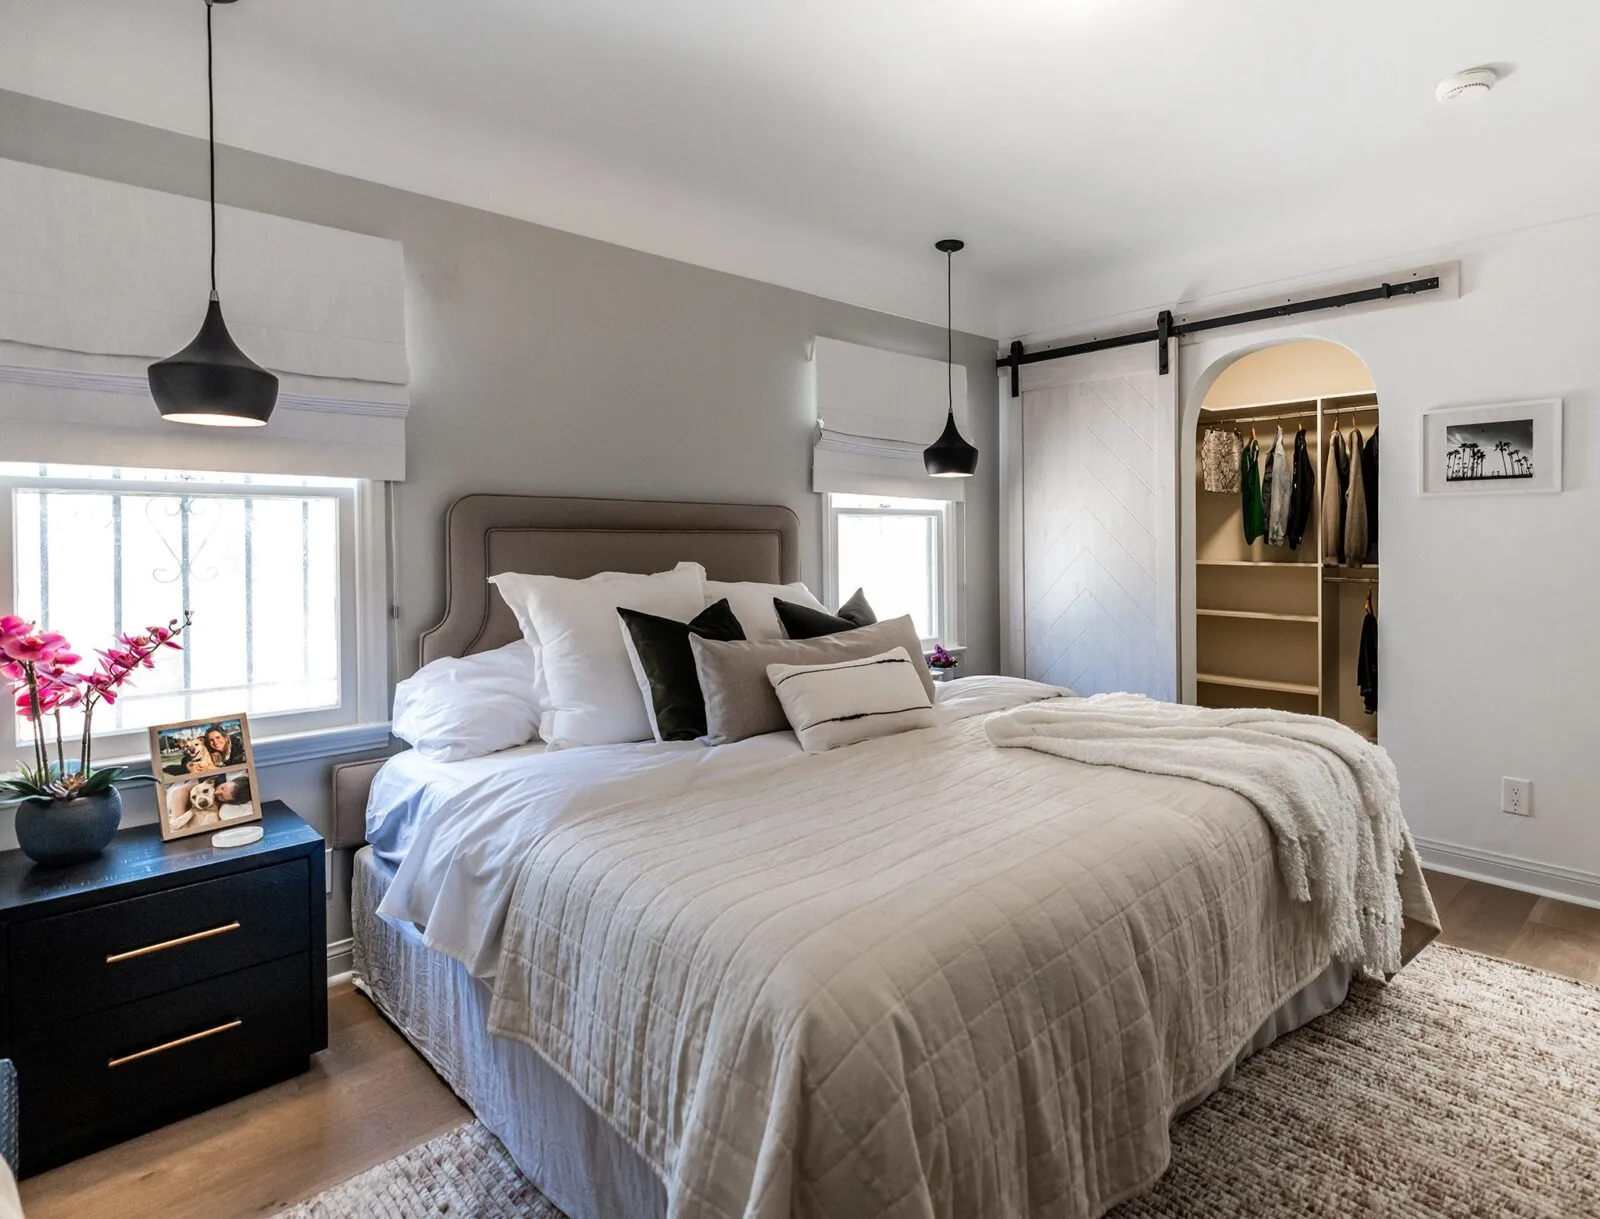 Best Bedroom Decorating Ideas from Property Brothers: Forever Home